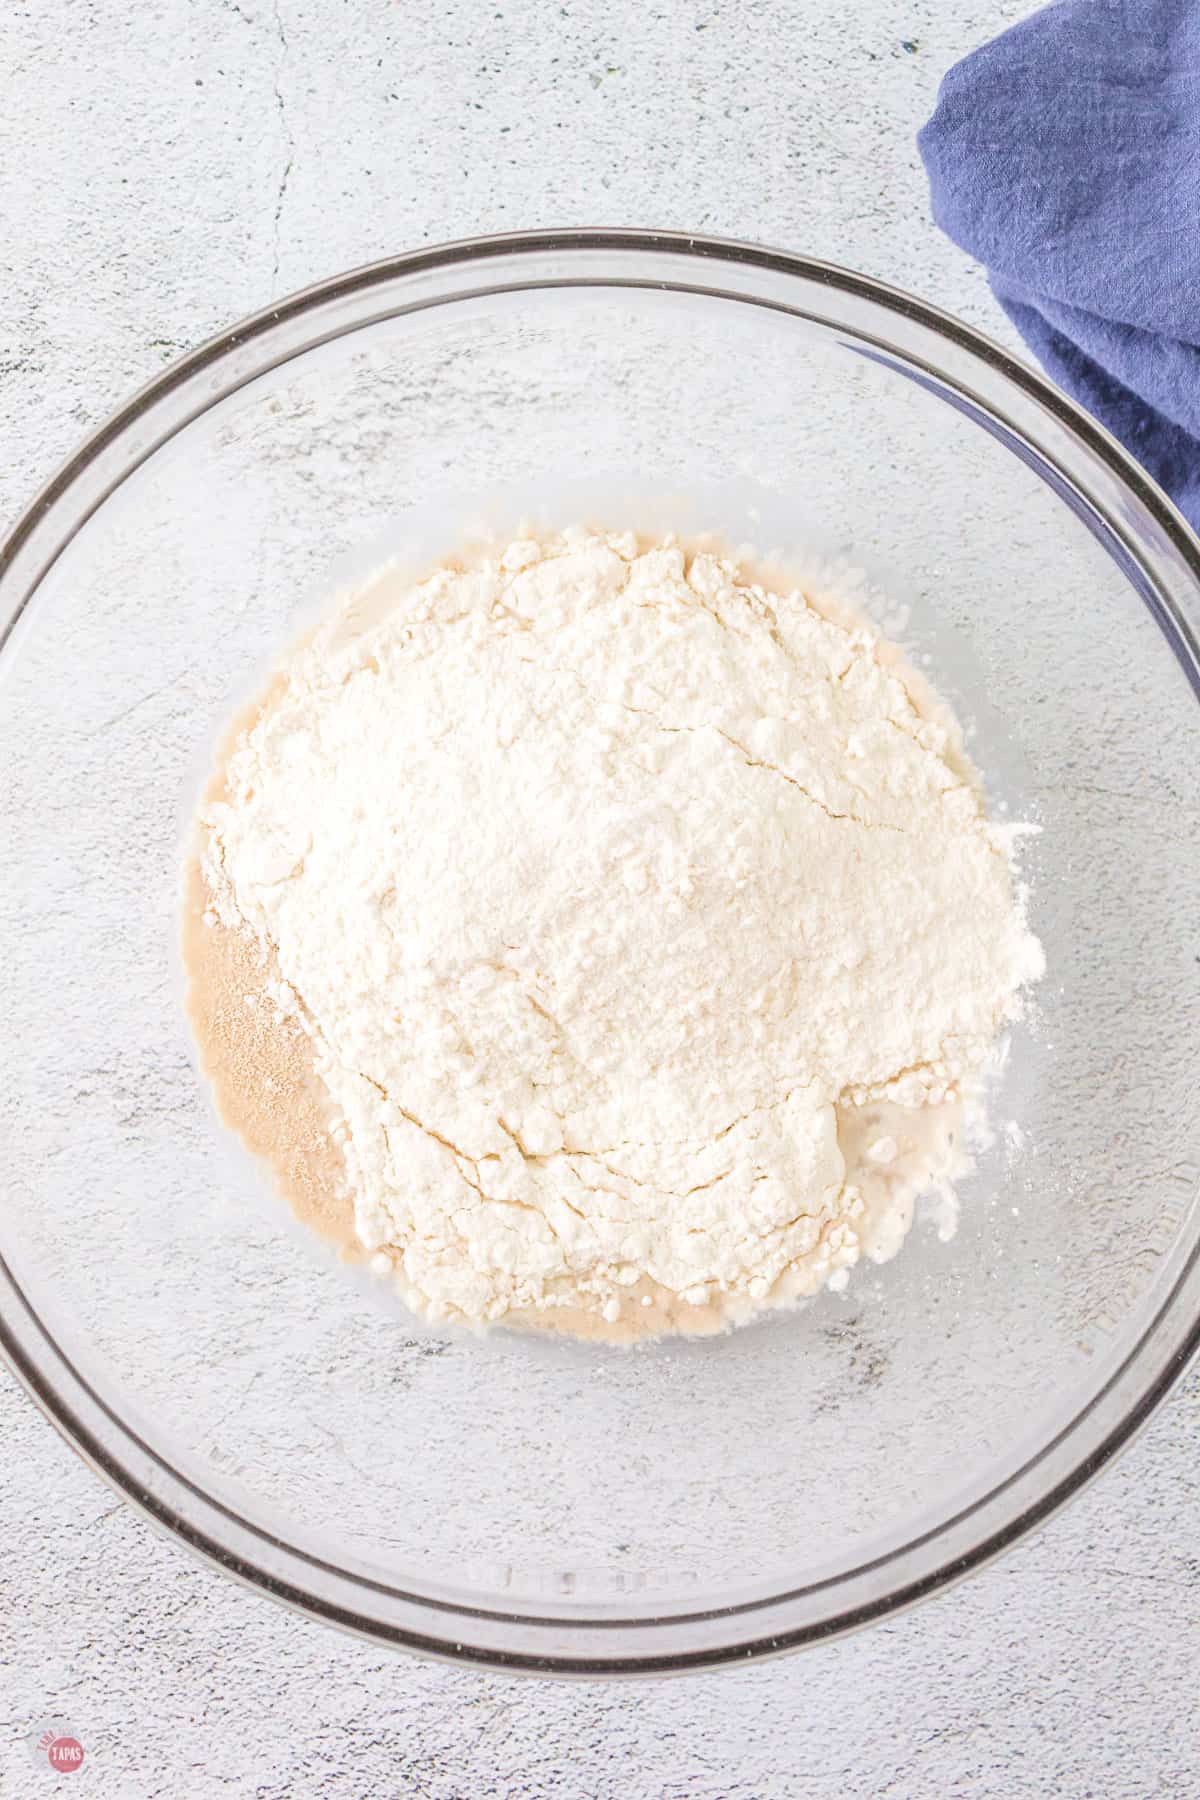 yeast and flour in a bowl